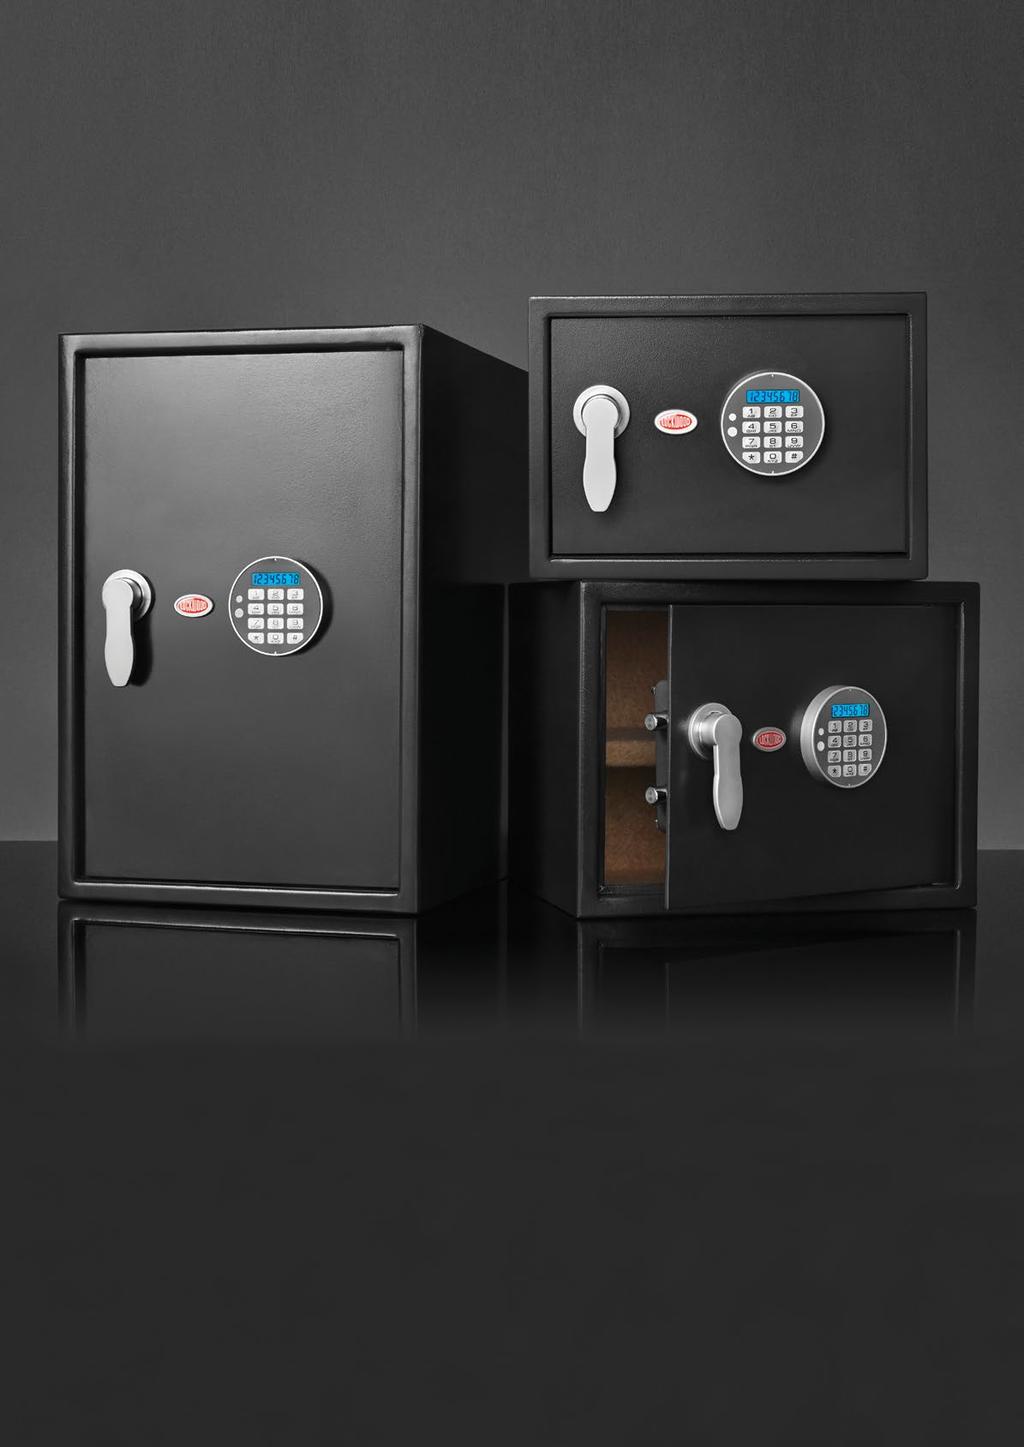 Lockwood Home Safes We take the worry out of protecting